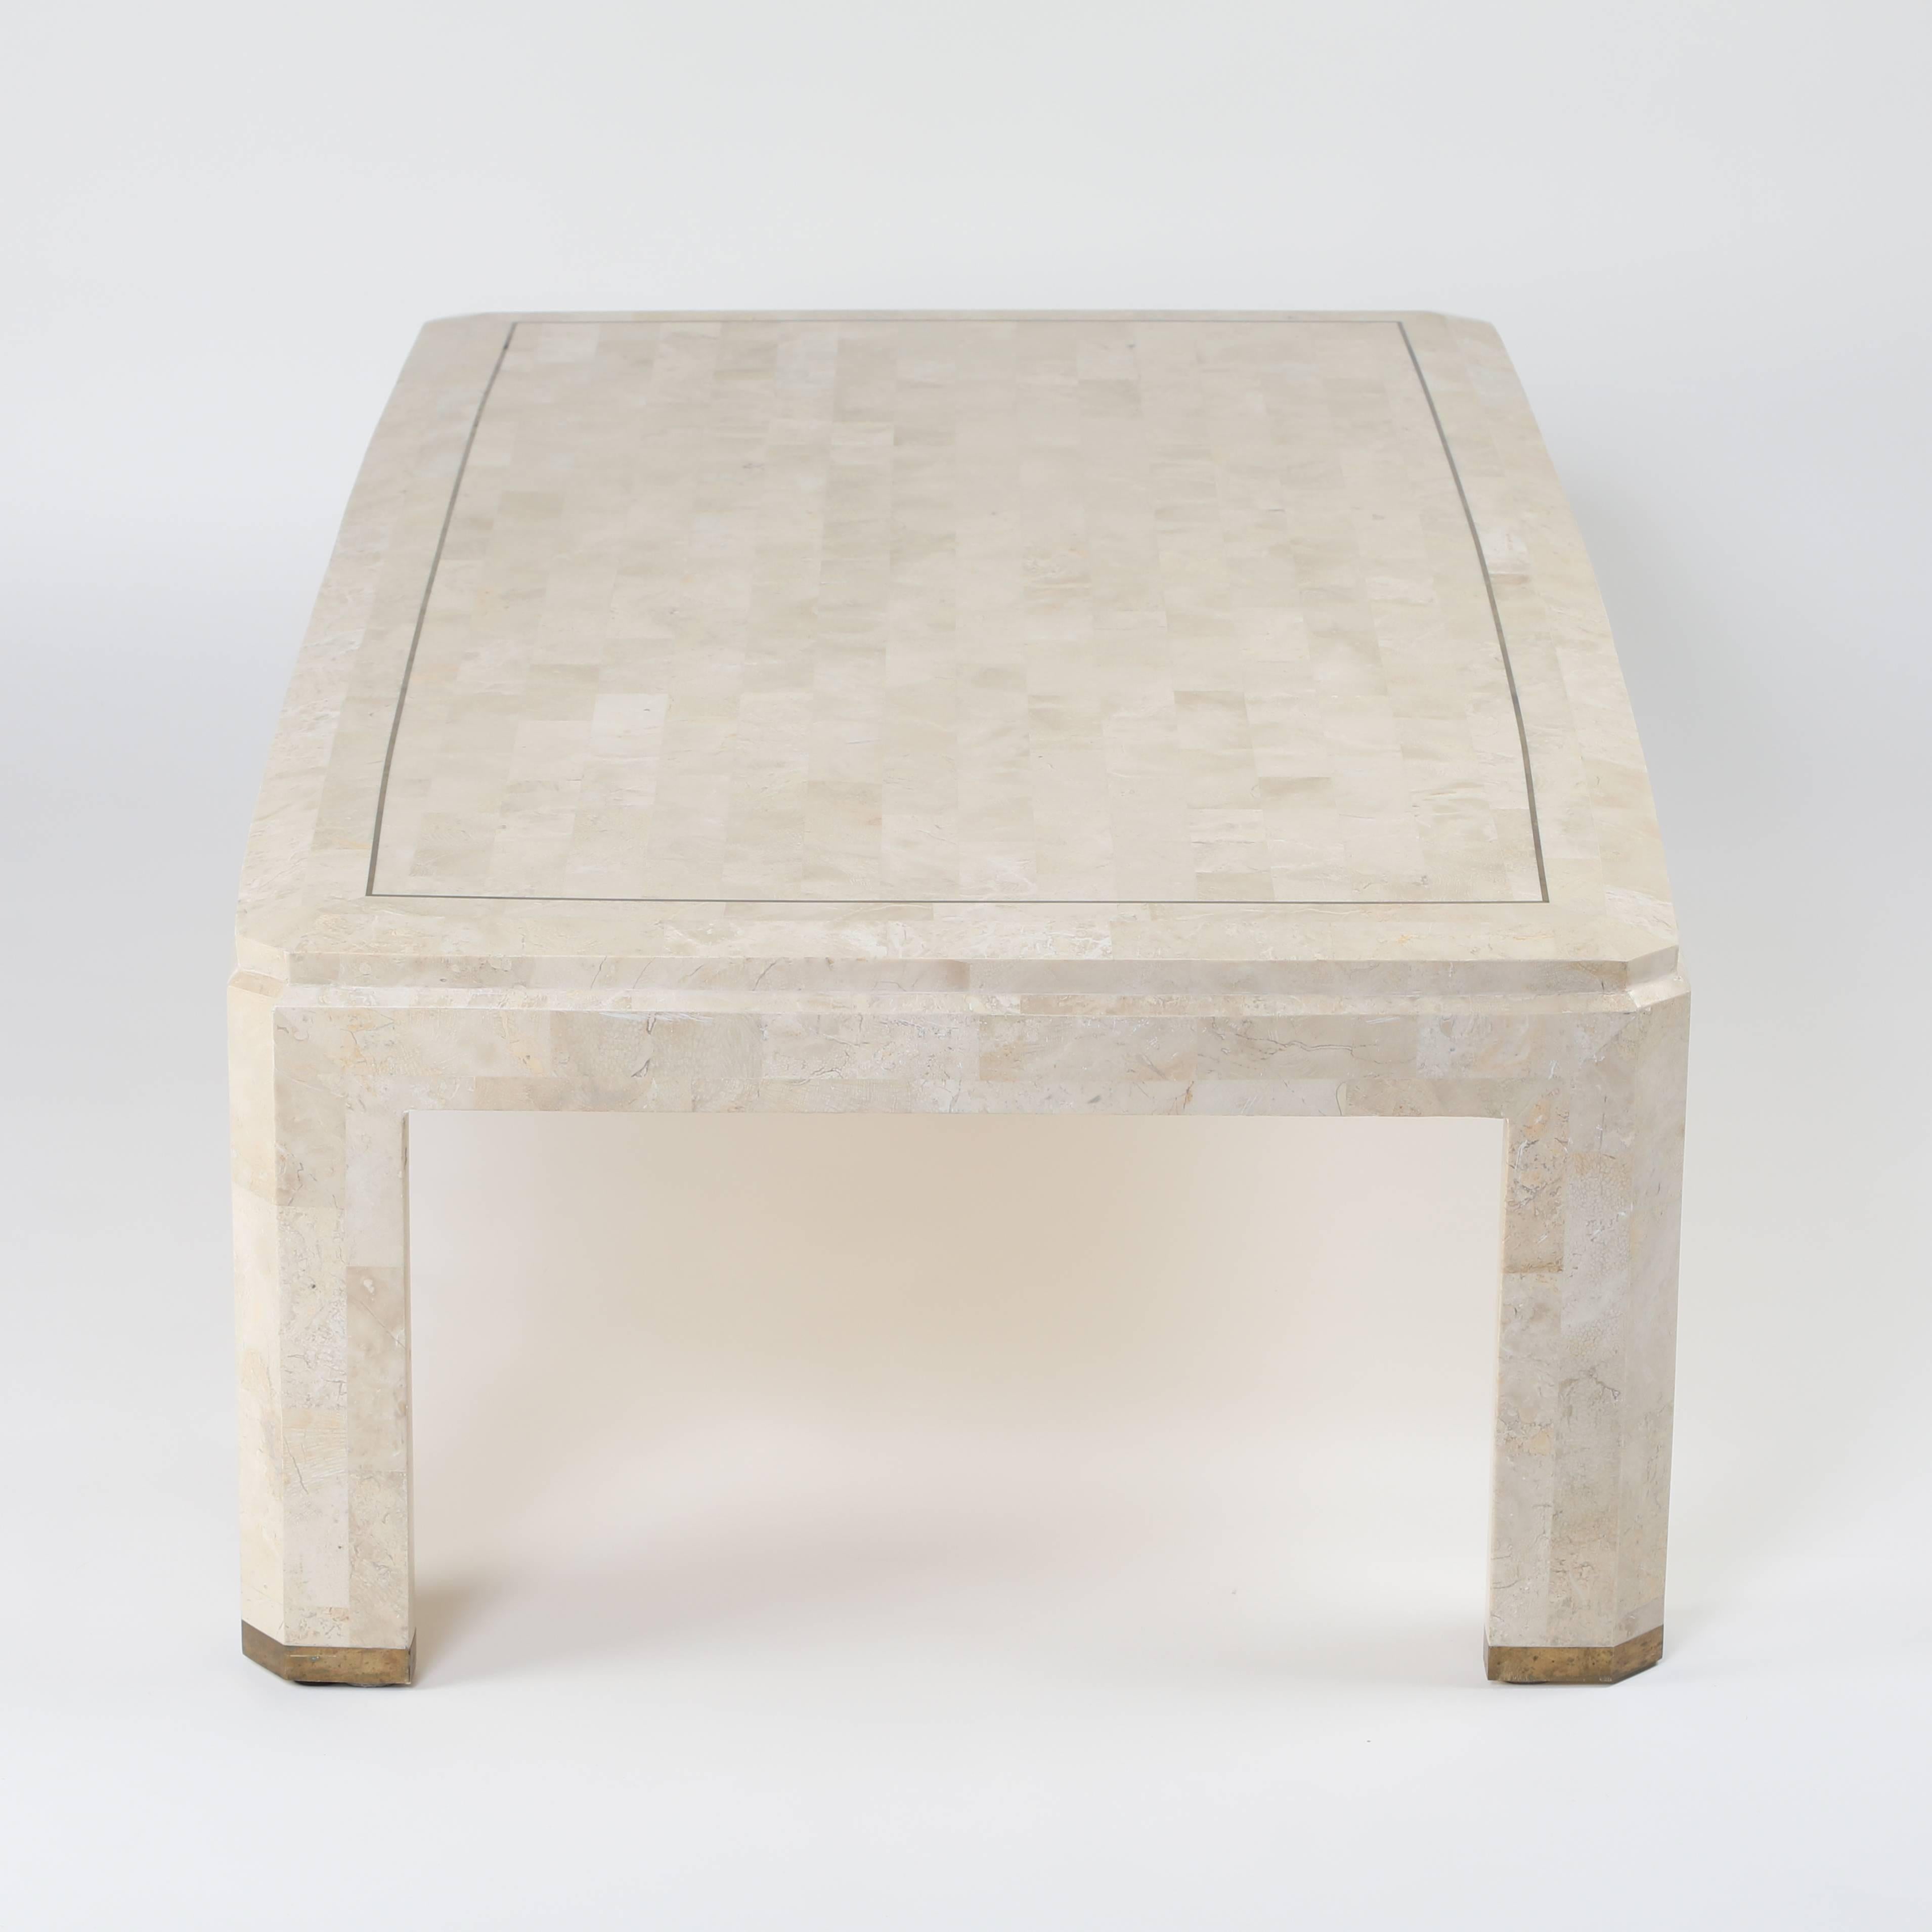 Philippine Maitland-Smith Tessellated Coral Stone and Brass Coffee Table, circa 1980s